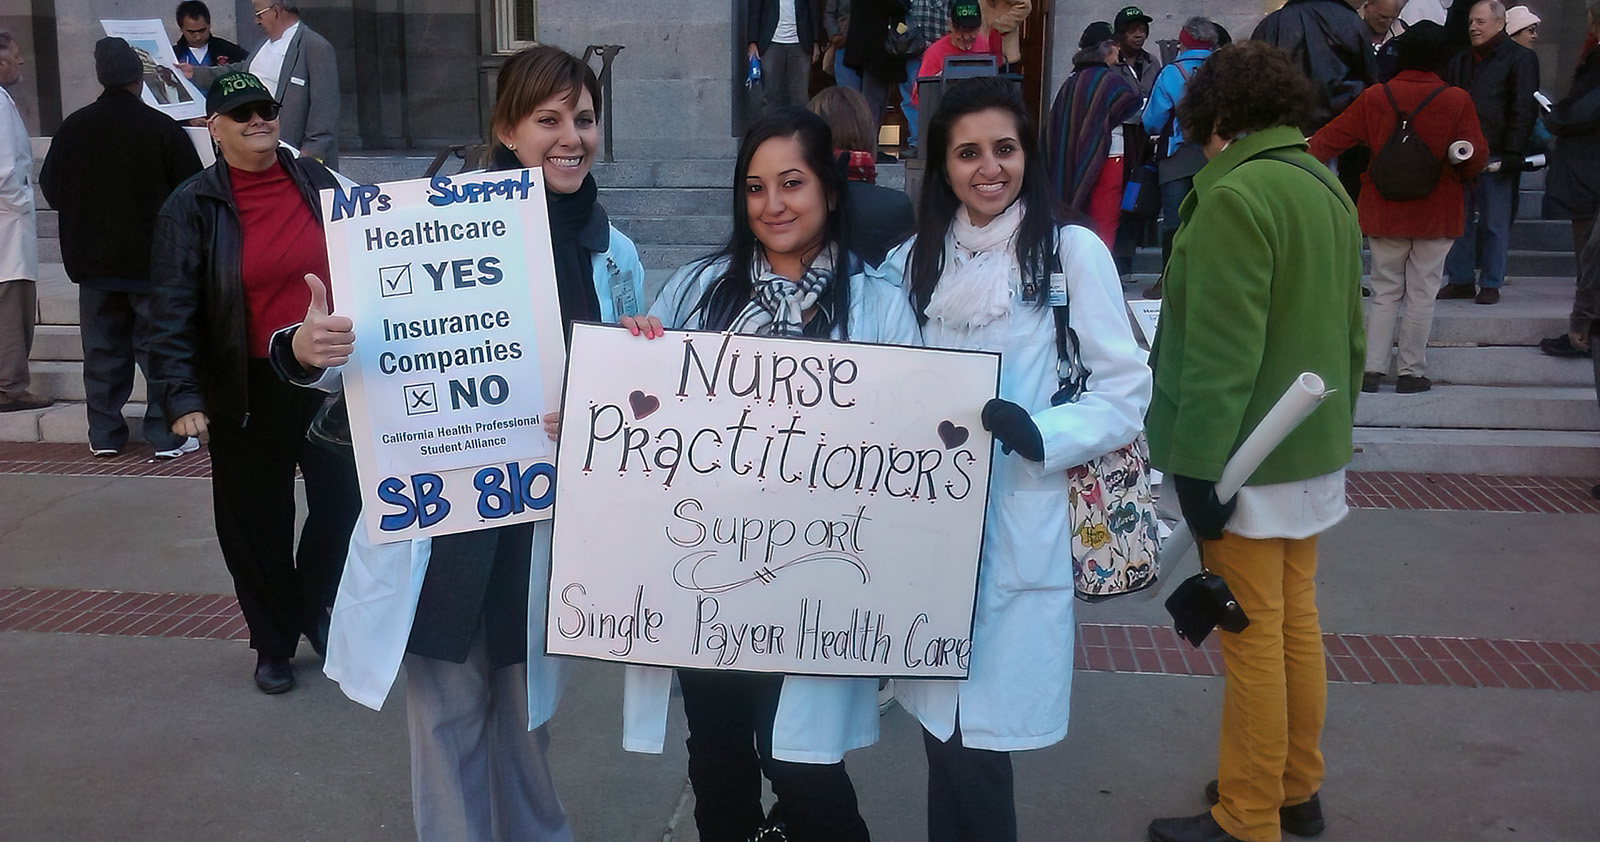 Three young women in lab coats holding up signs that say "Nurse Practitioners Support Single Payer Health Care"